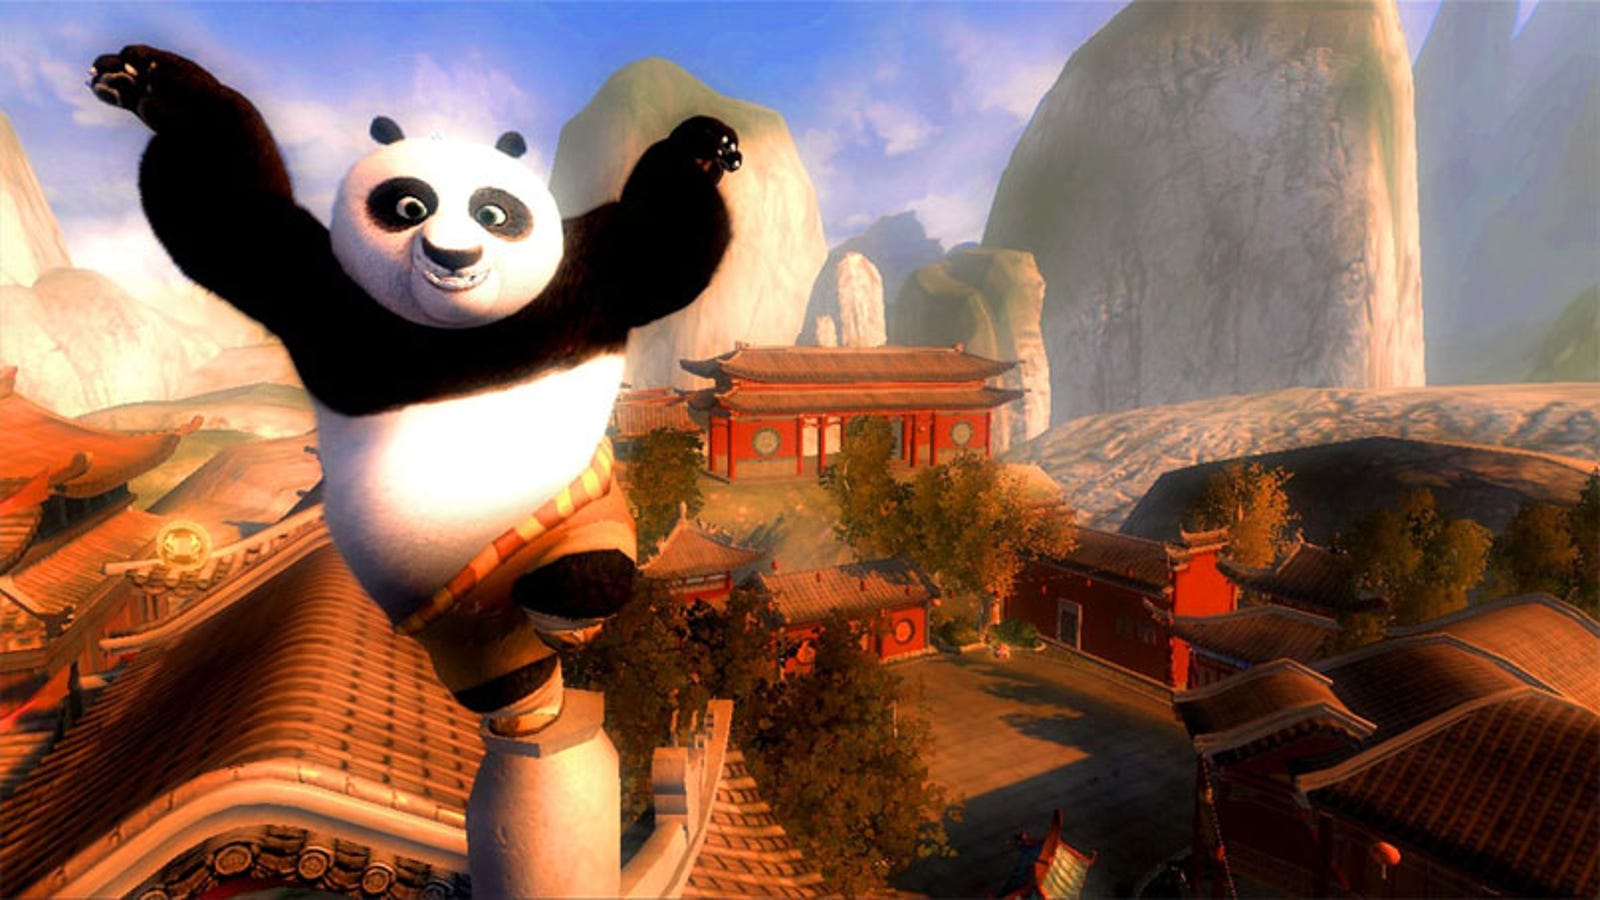 Kung Fu Panda Had The Best Video Game Animation Of 2008. Conversation Over.